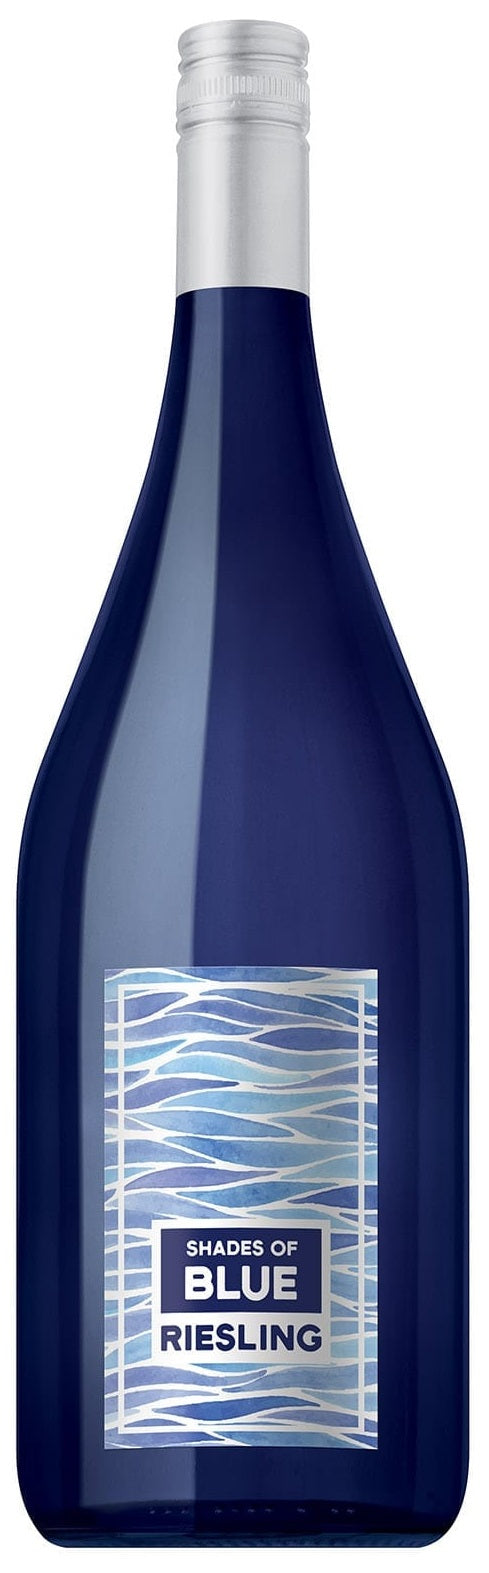 SHADES OF BLUE RIESLING